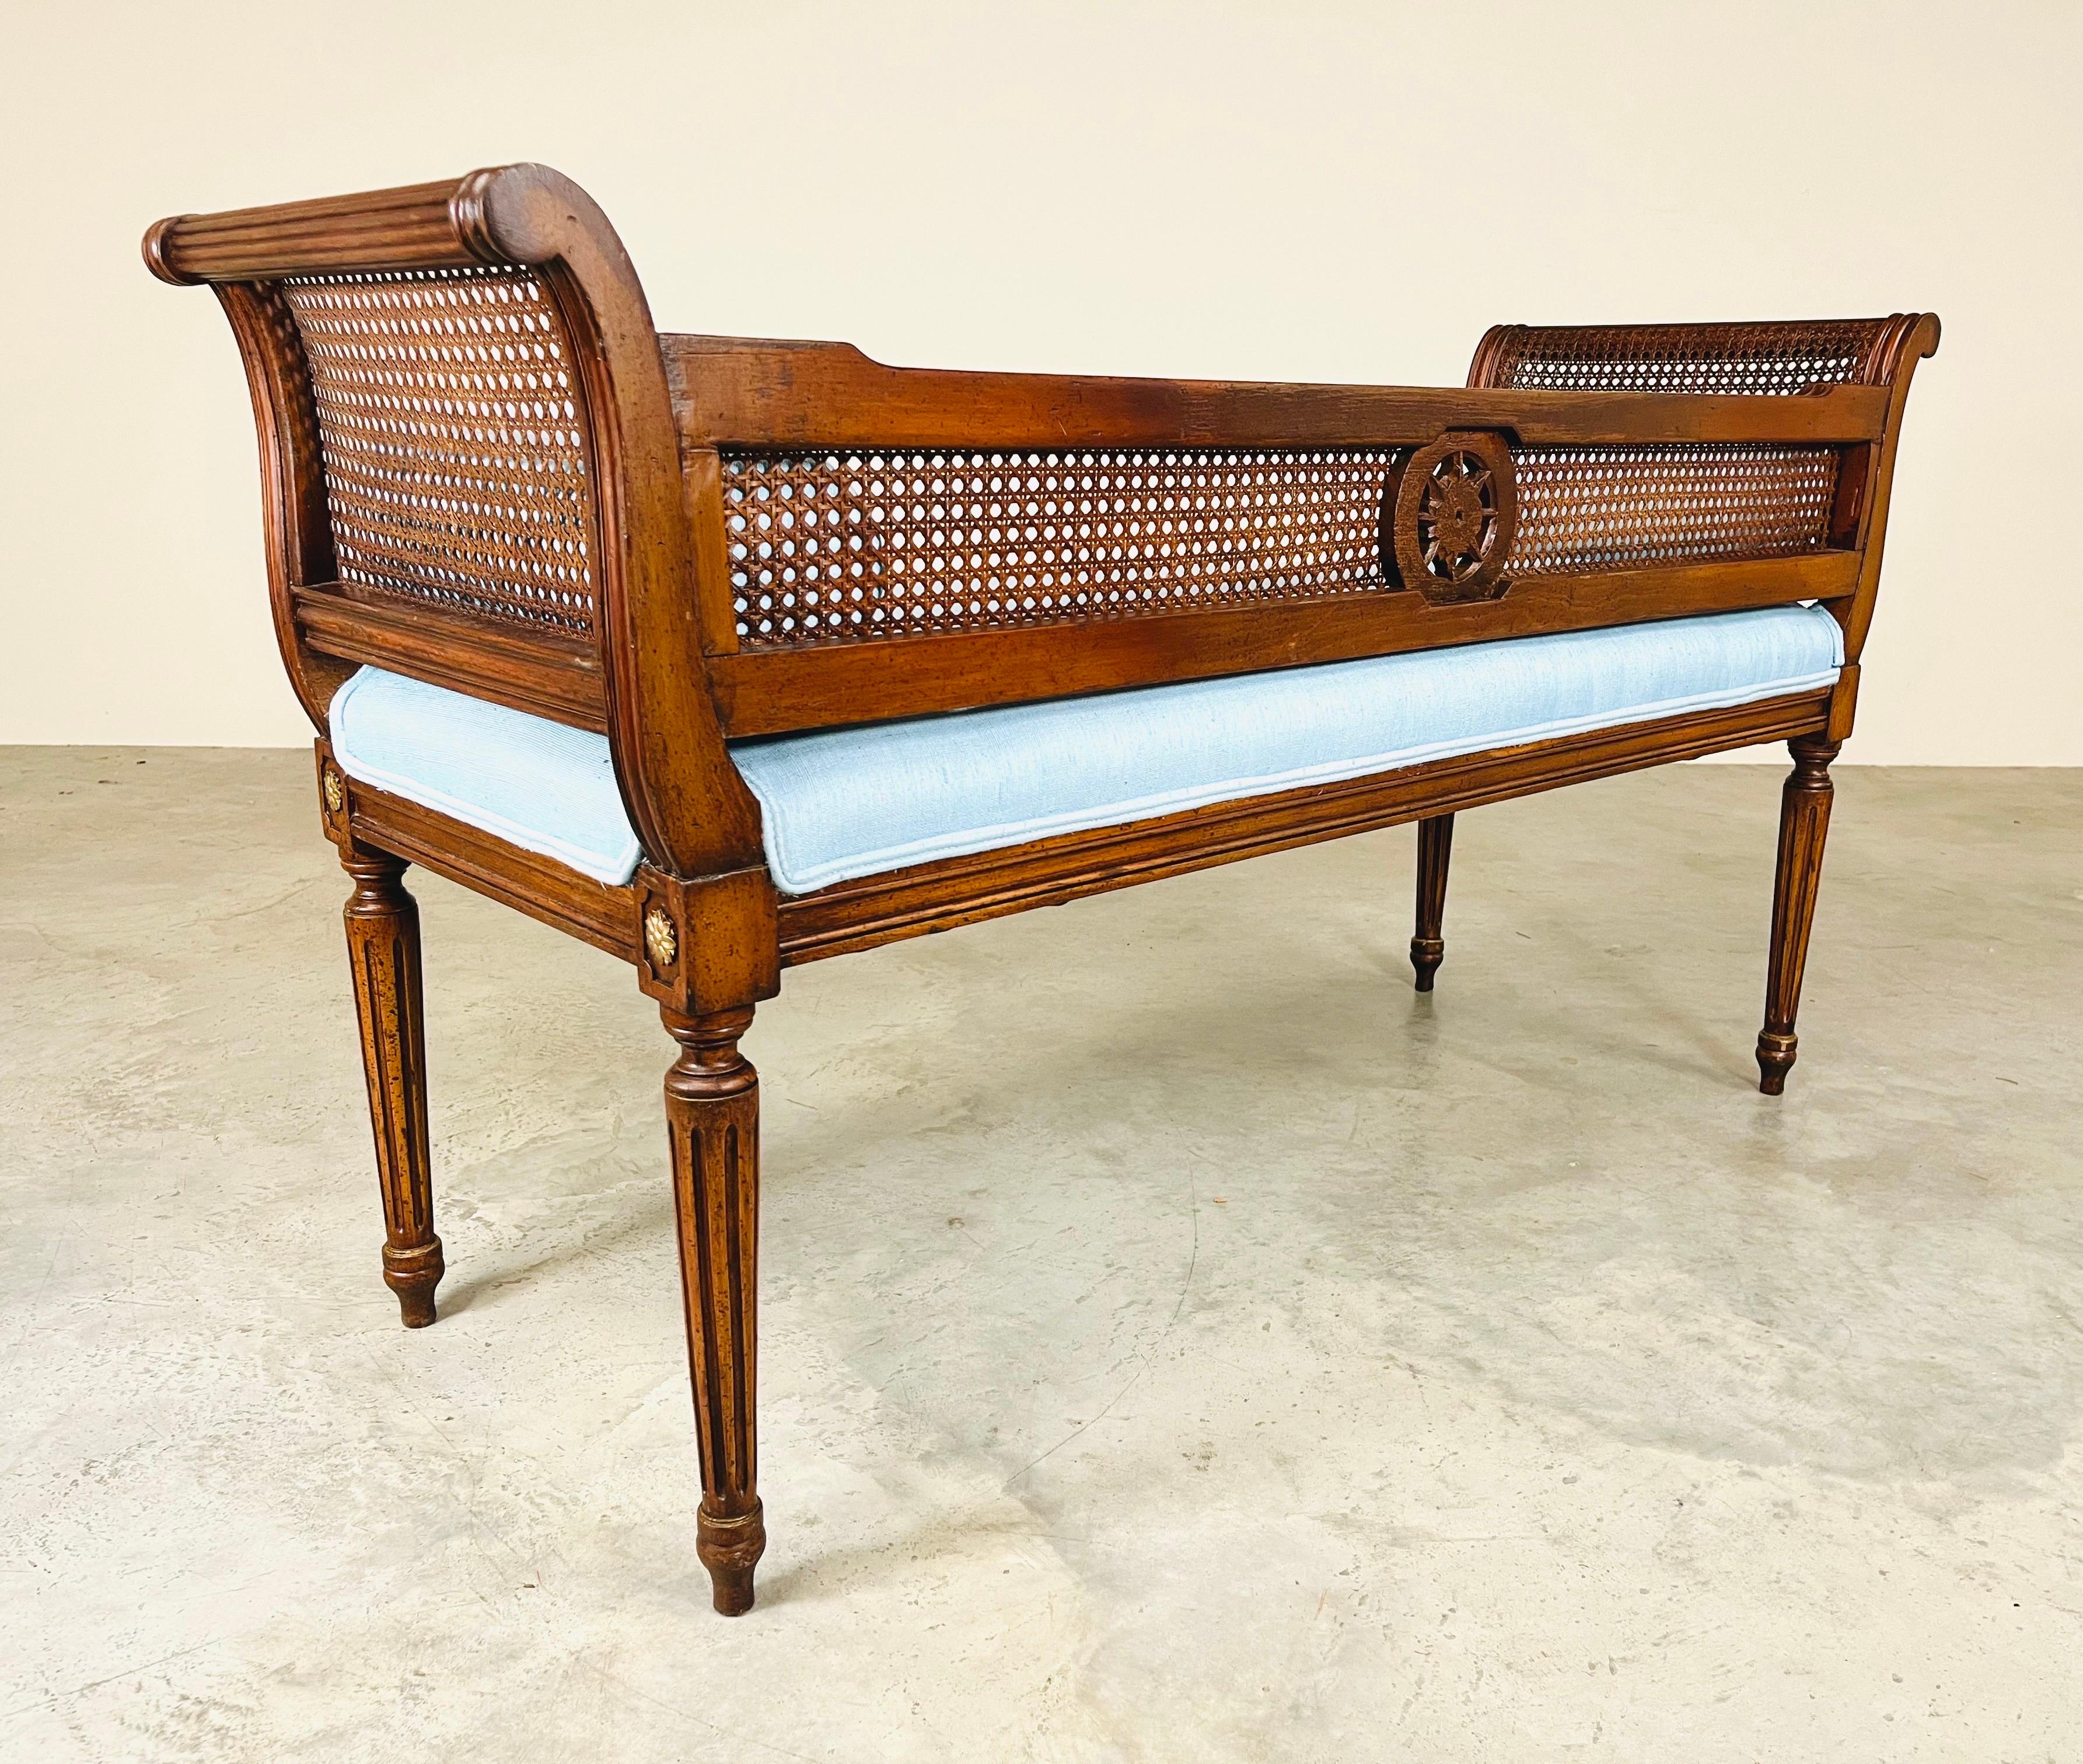 20th Century Louis XVI Style Caned Scroll Arm Window Bench with Gold Gilt Embellishments 